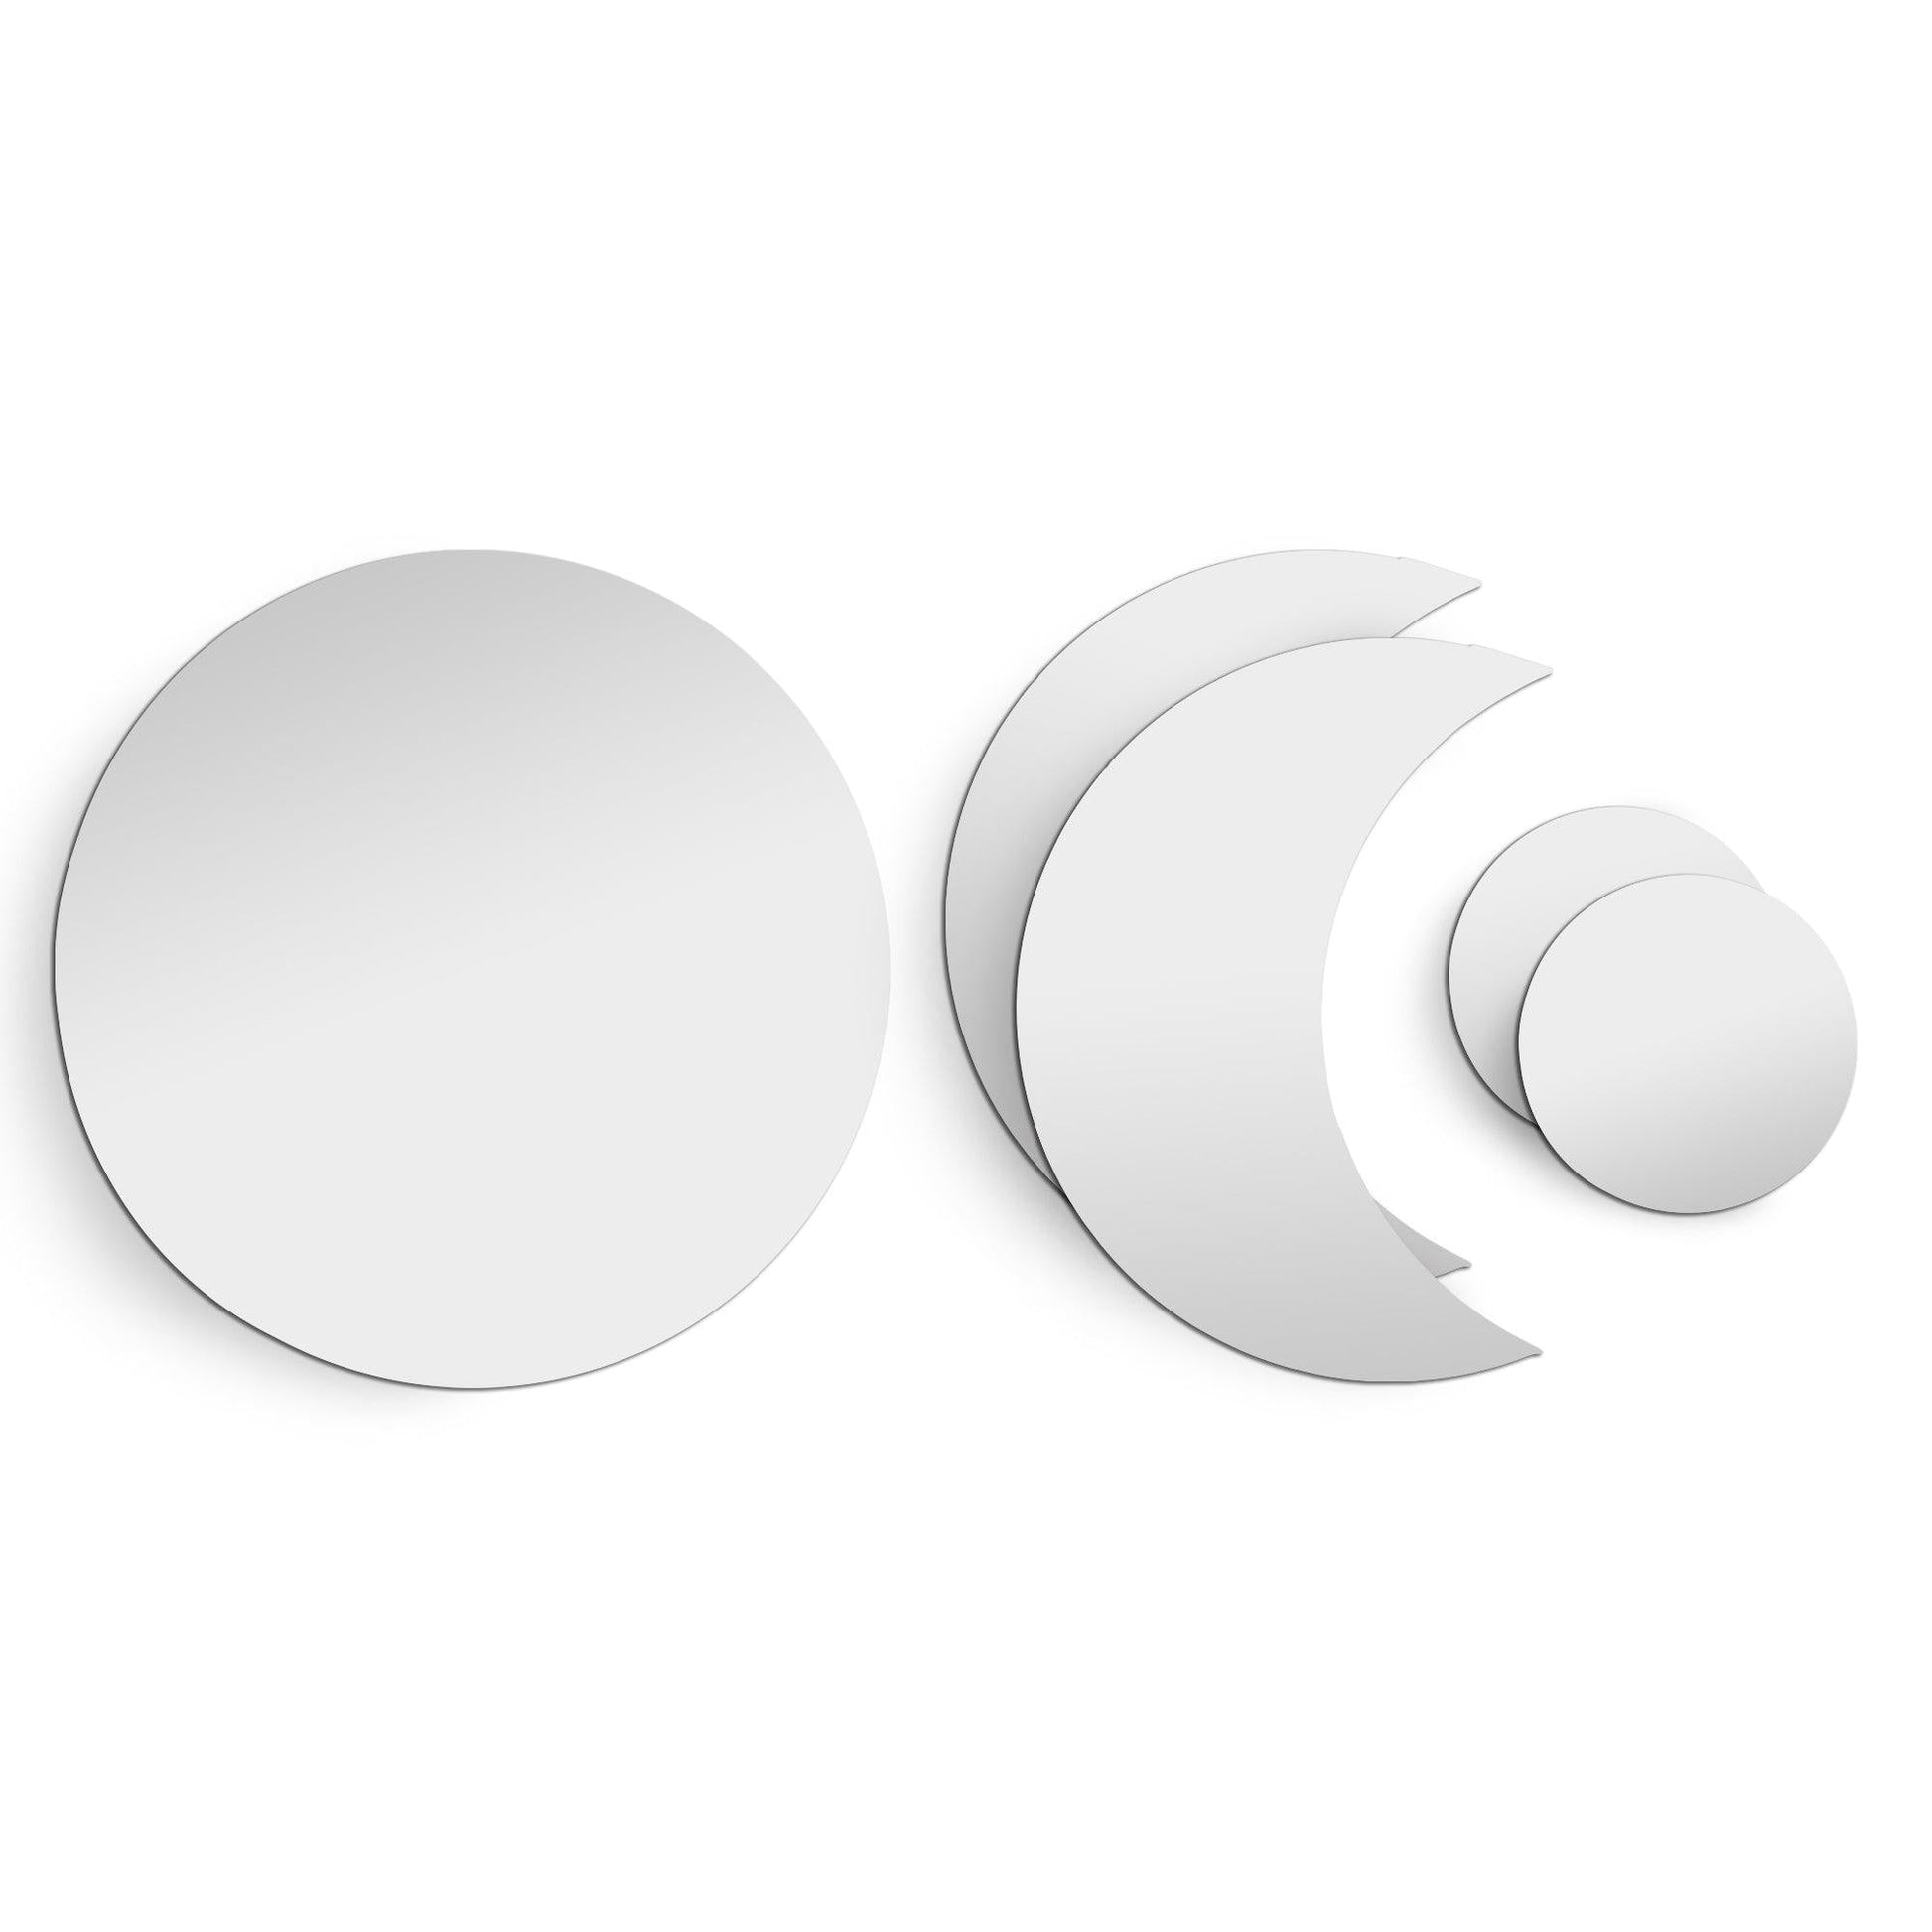 Americanflat Adhesive Mirror Tiles - Moon Phase Design - Peel and Stick Mirrors for Wall - (5pcs Set)